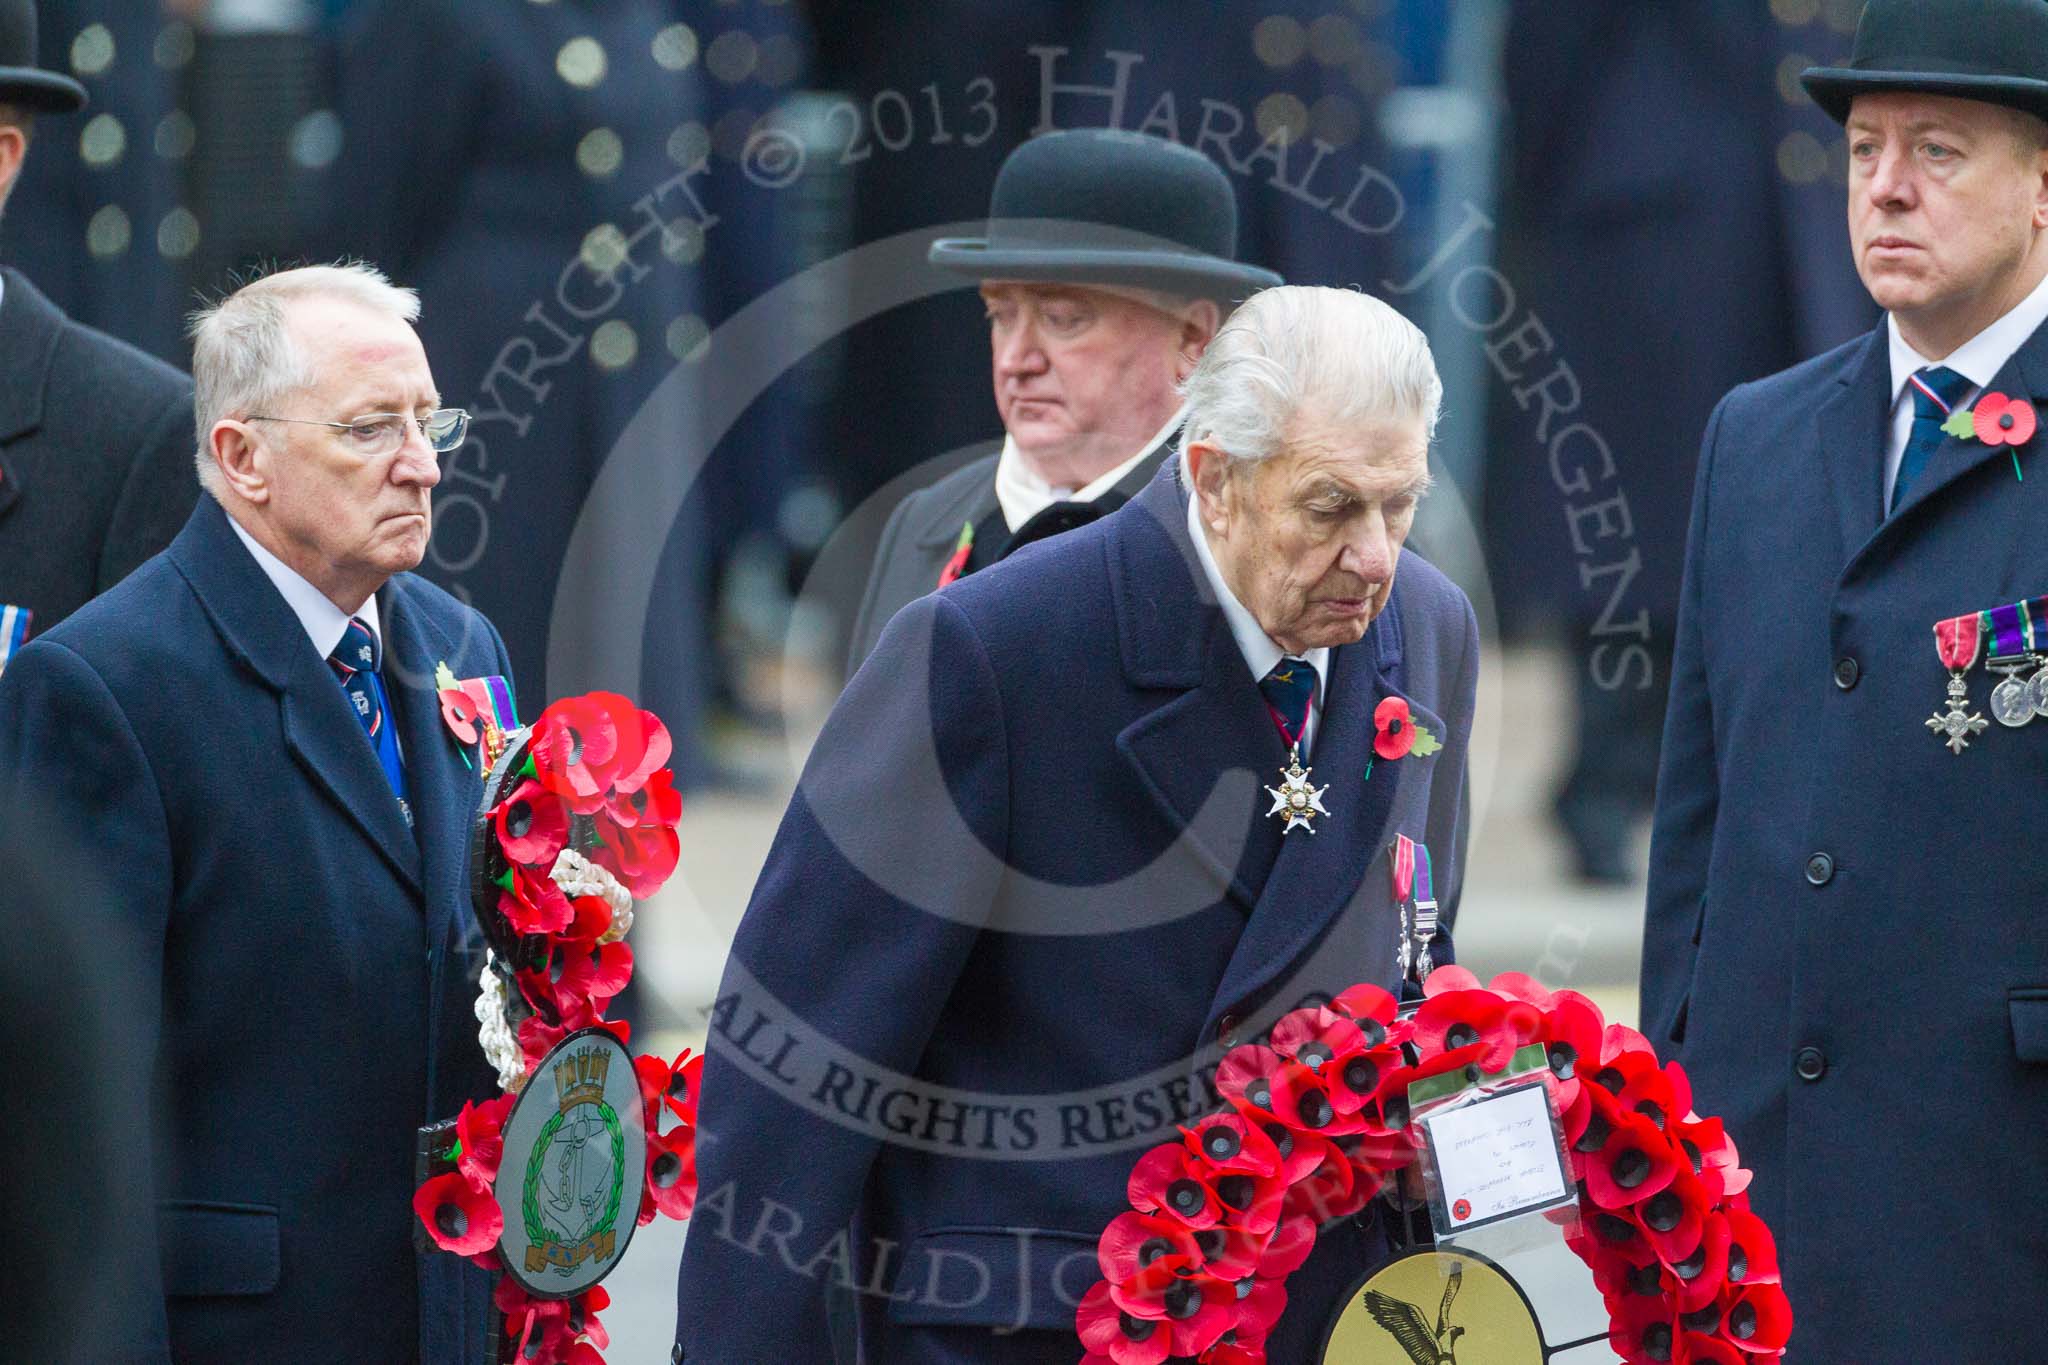 Remembrance Sunday at the Cenotaph 2015: Air Vice-Marshal David Whitaker, area president of the Royal Air Force Association, will lay a wreath on their behalf. Behind him Christopher Dovey, the national chairman of the Royal Naval Association. Image #338, 08 November 2015 11:25 Whitehall, London, UK